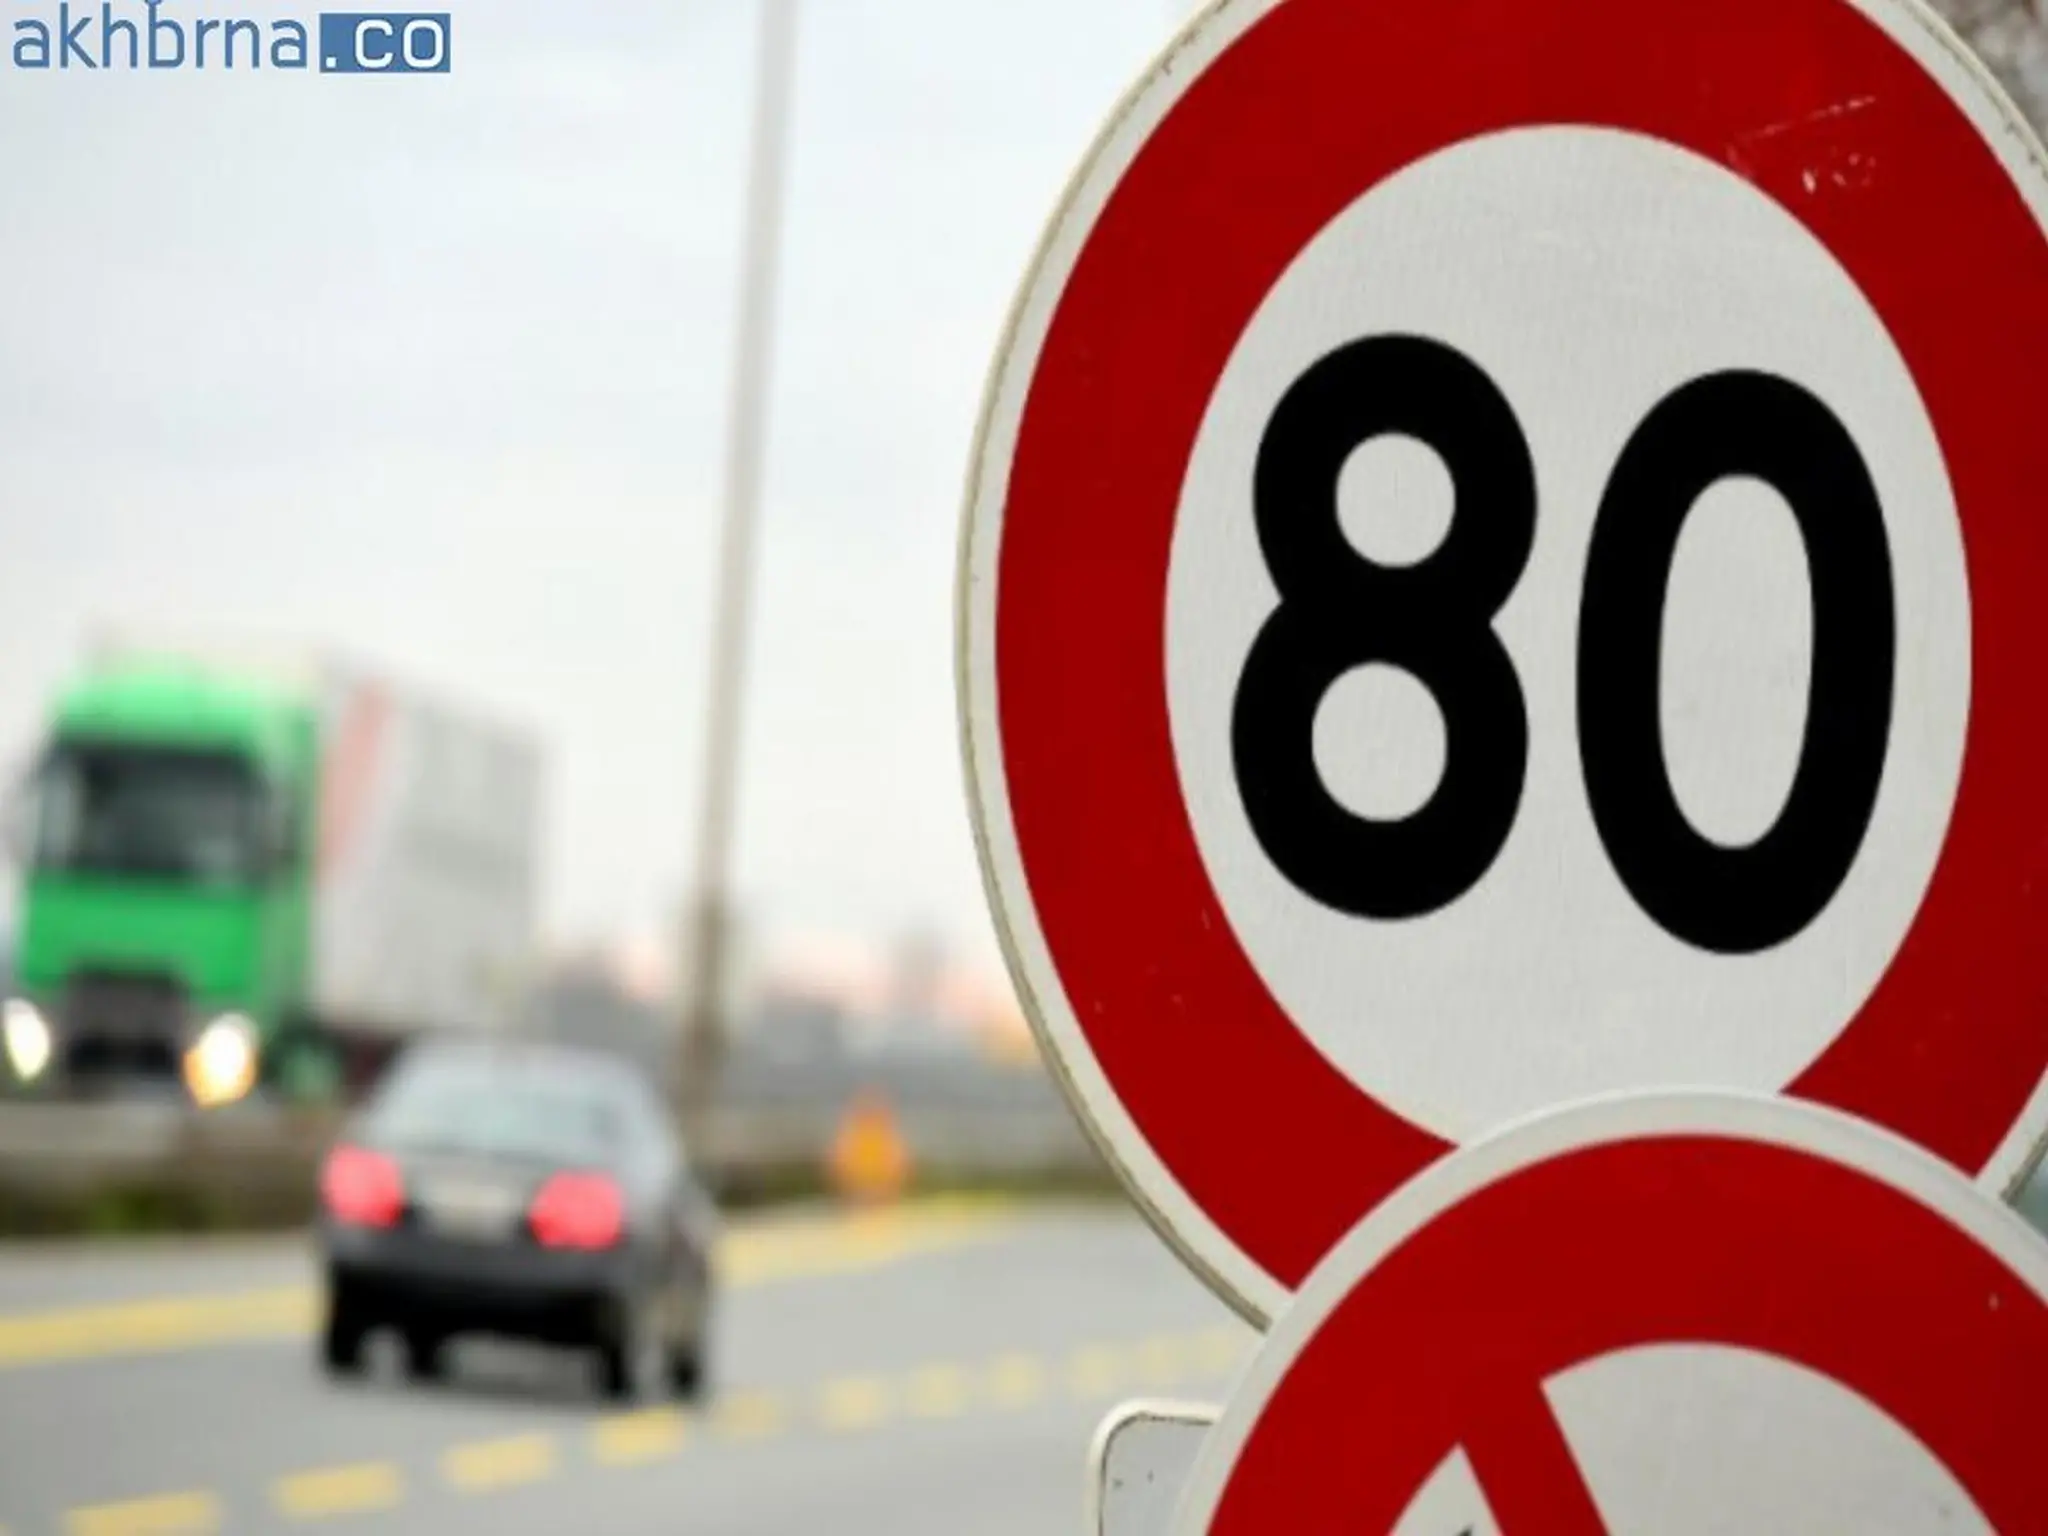 UAE Authority announces new speed limits on three main roads in Abu Dhabi